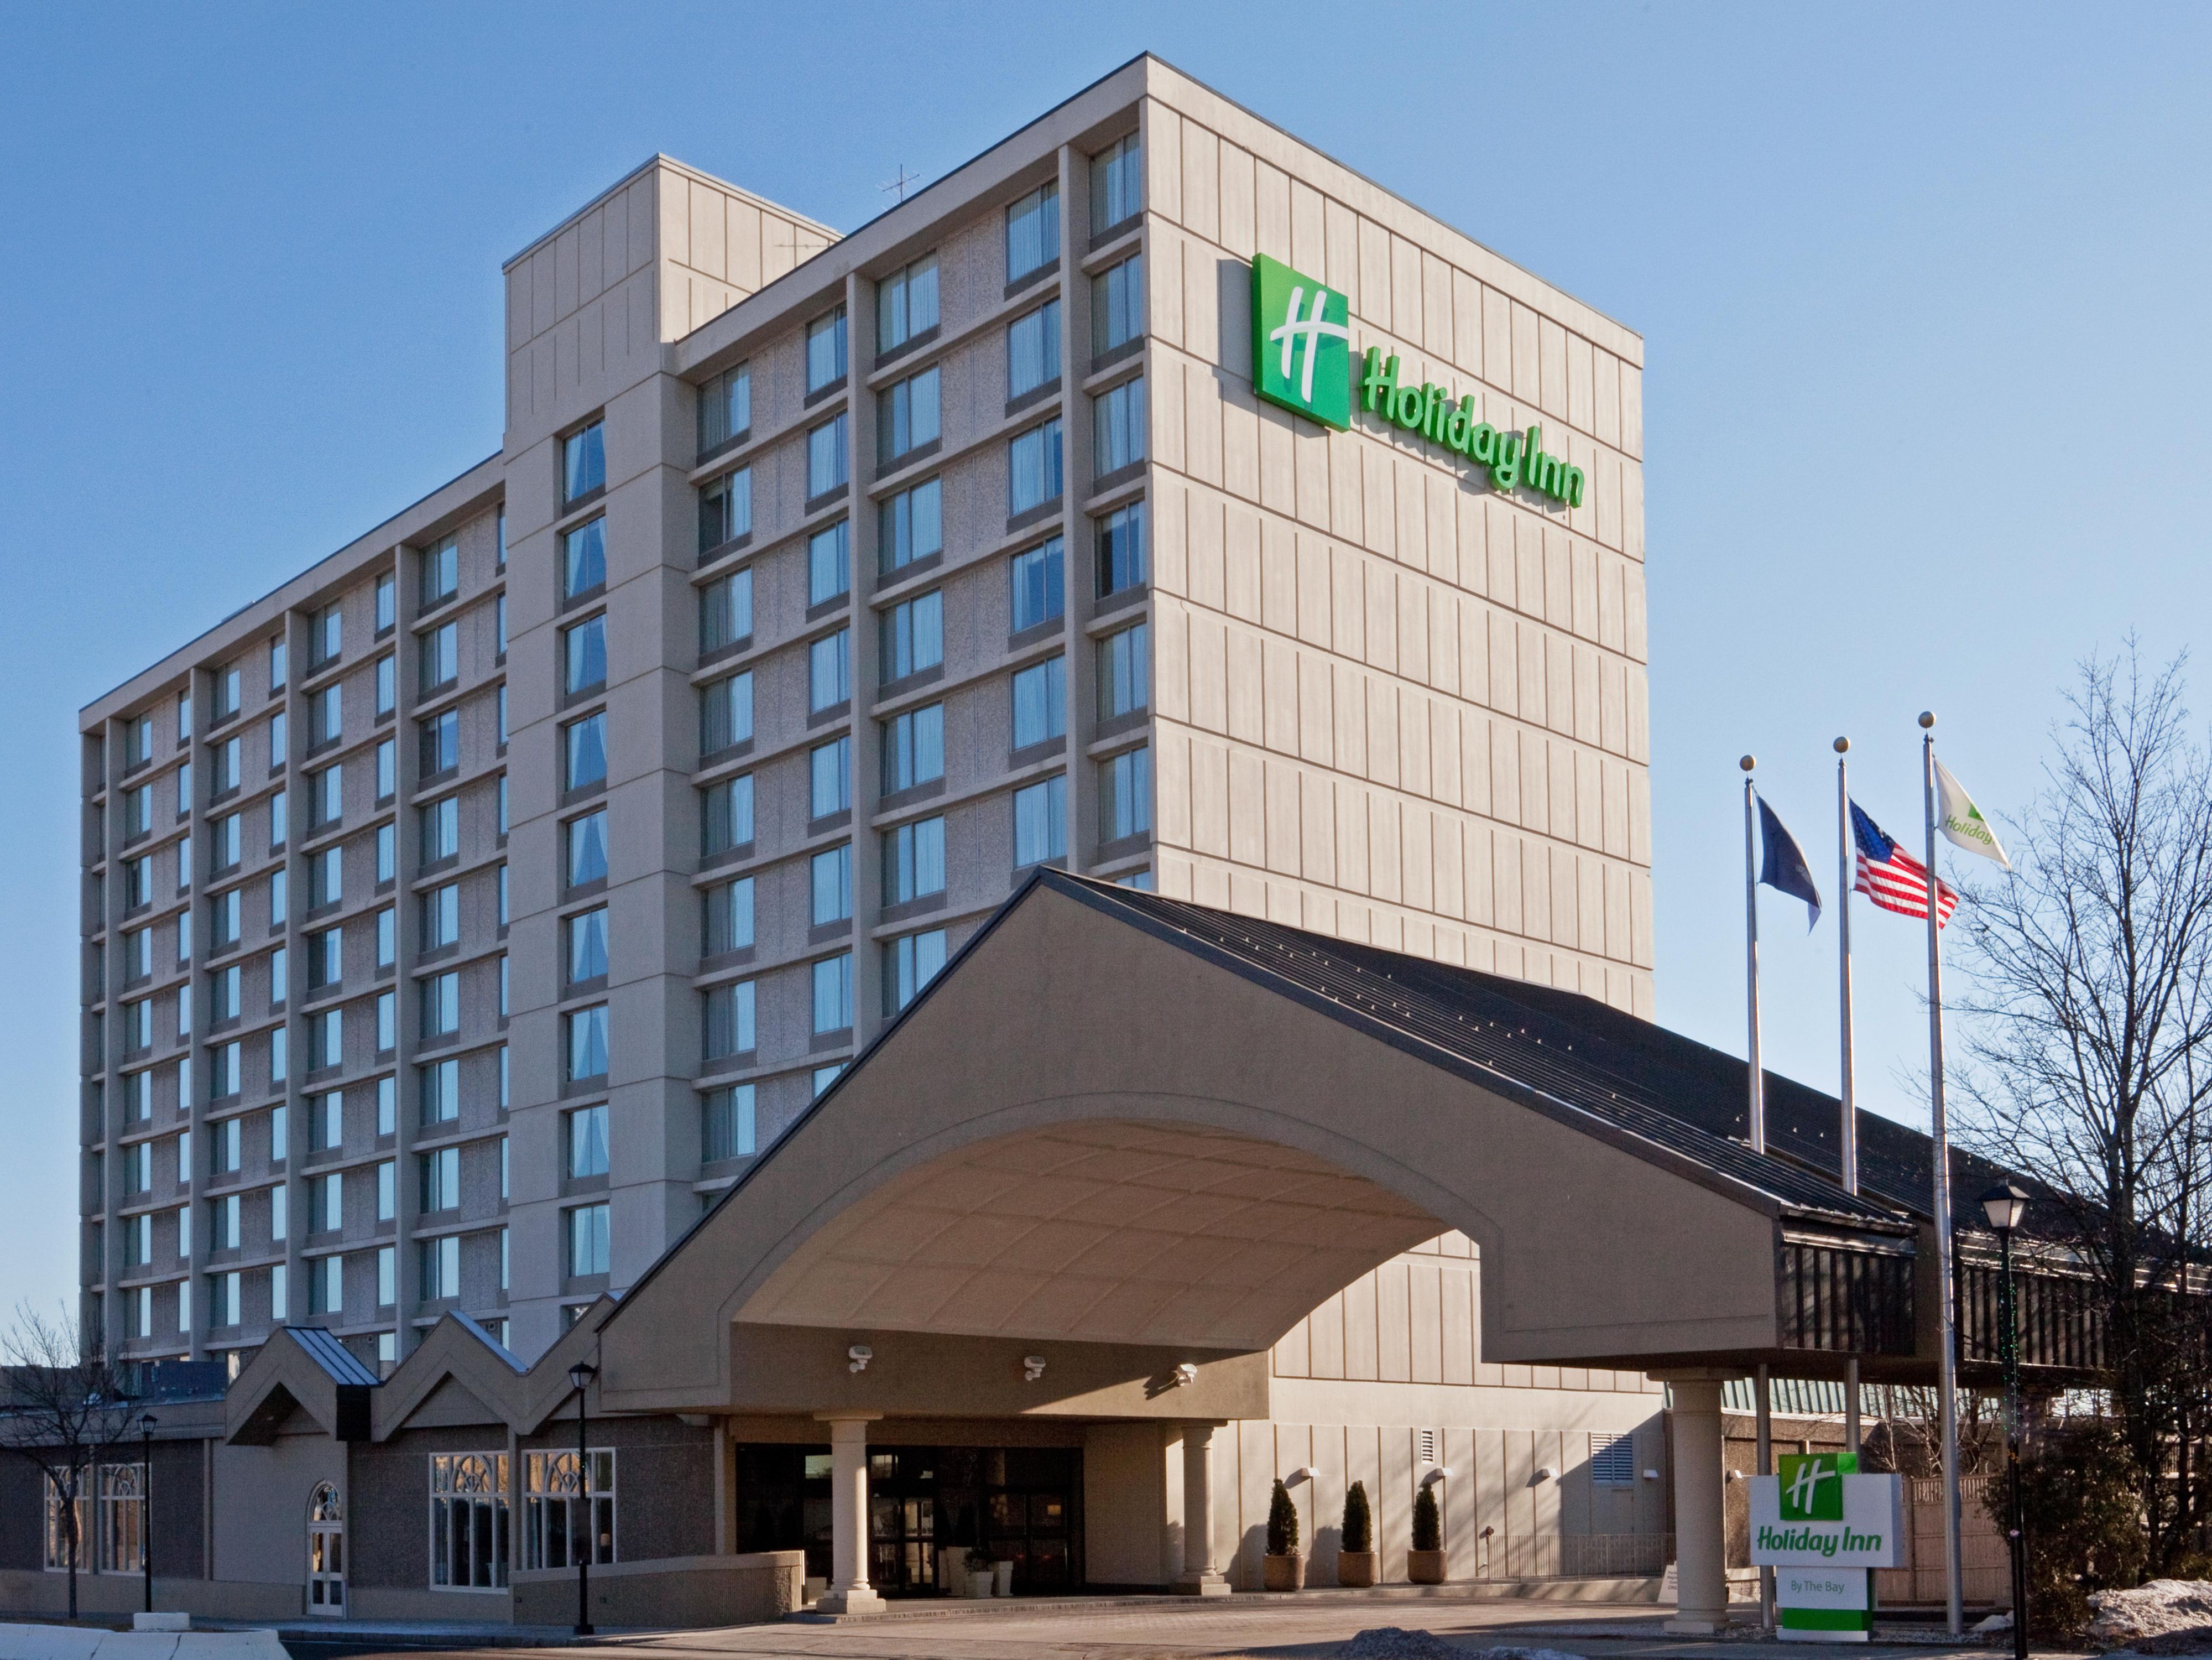 Hotels in Downtown Portland, Maine by the Bay | Holiday Inn Portland-By The Bay